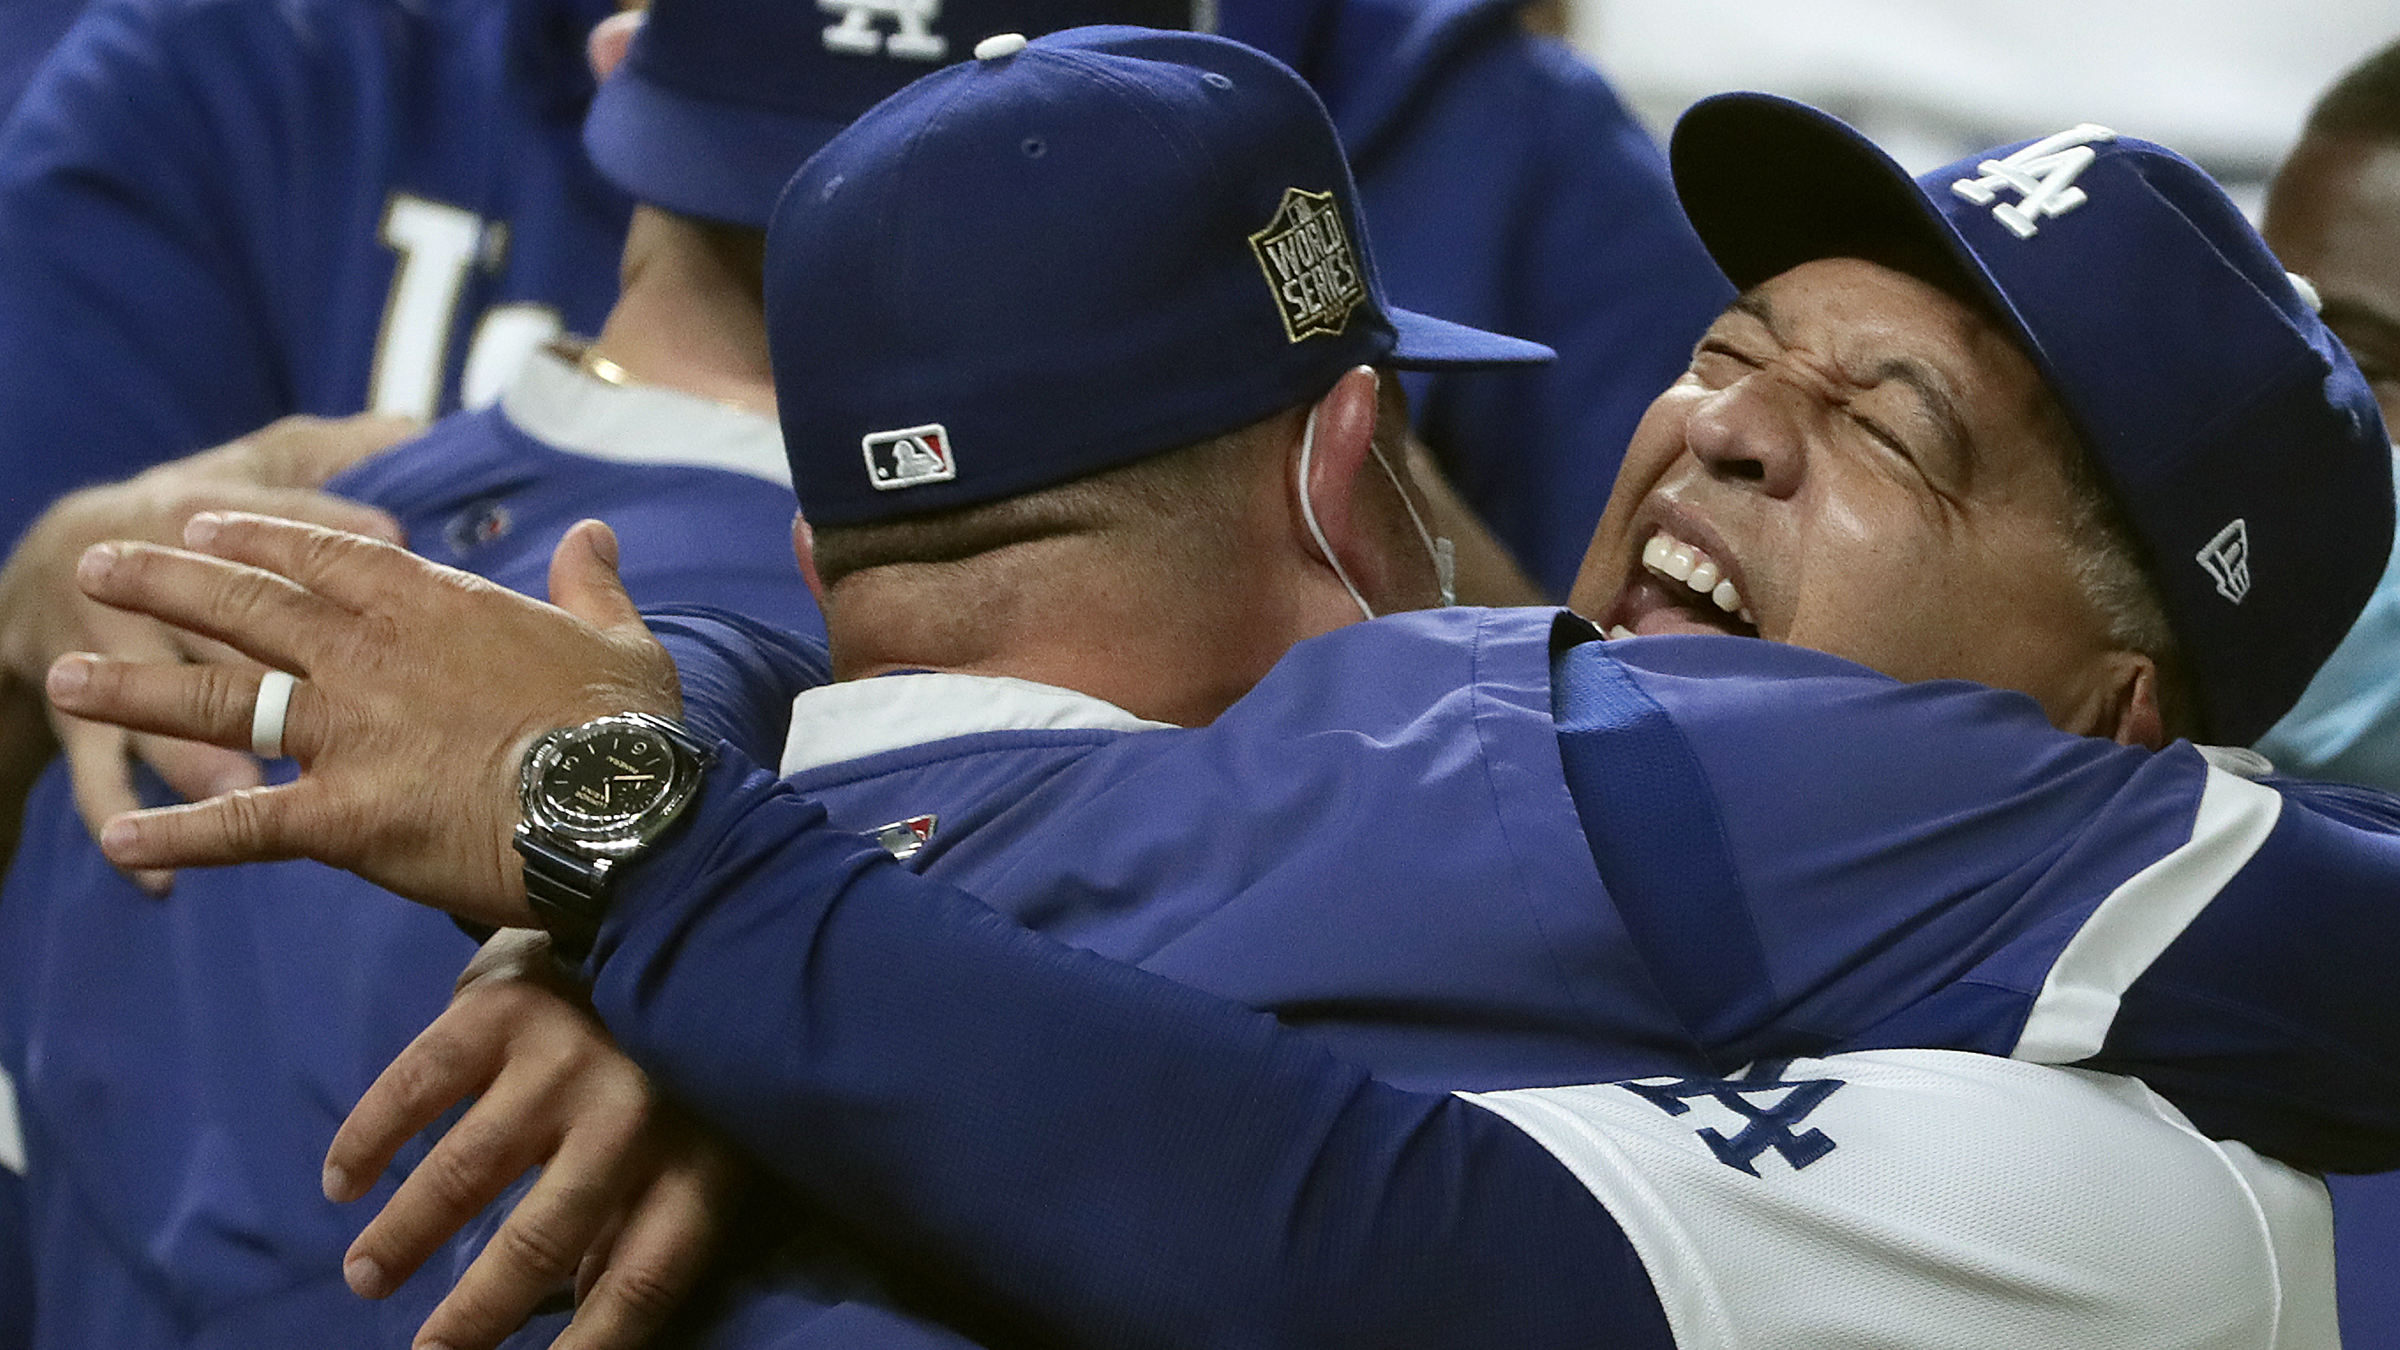 Watch Spotting Manager Dave Roberts Wearing A Panerai Luminor Marina As The Los Angeles Dodgers Win The 2020 World Series